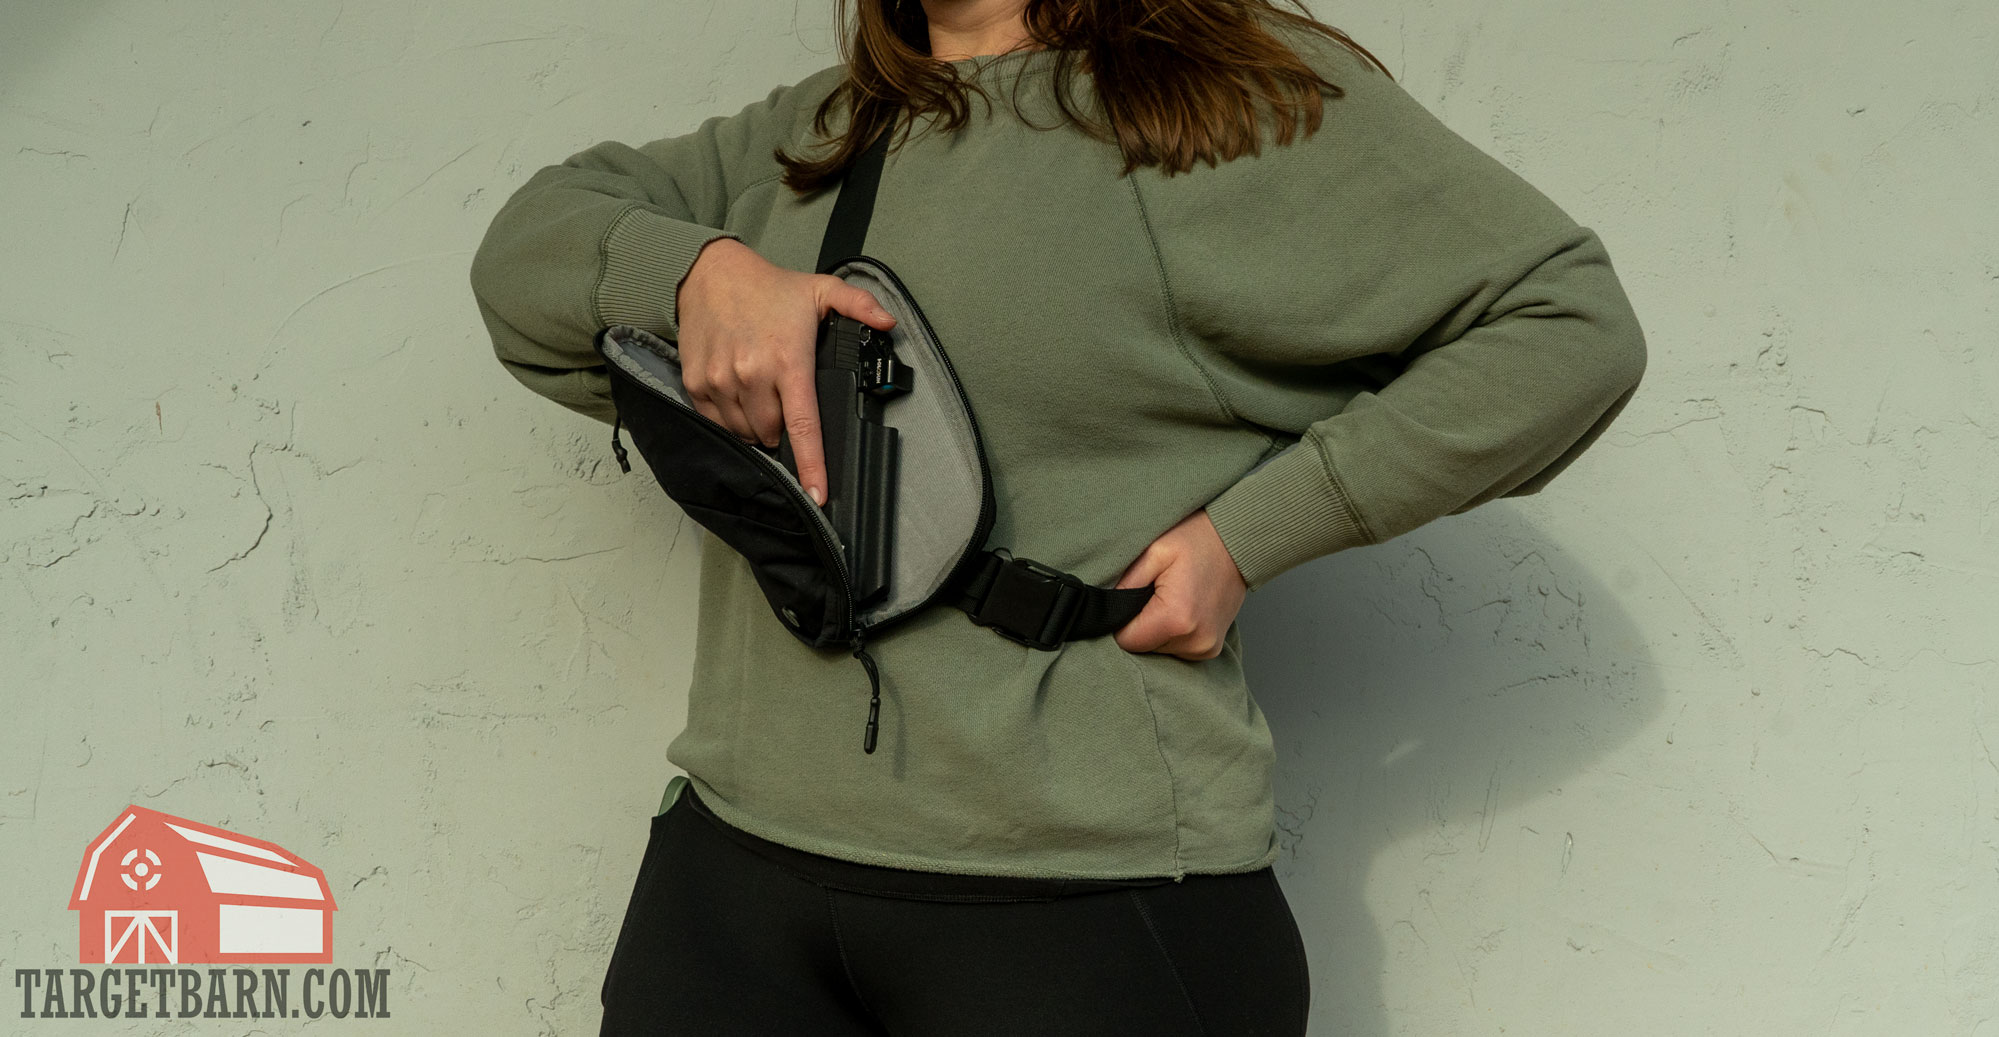 holding the fanny pack stable to draw the gun